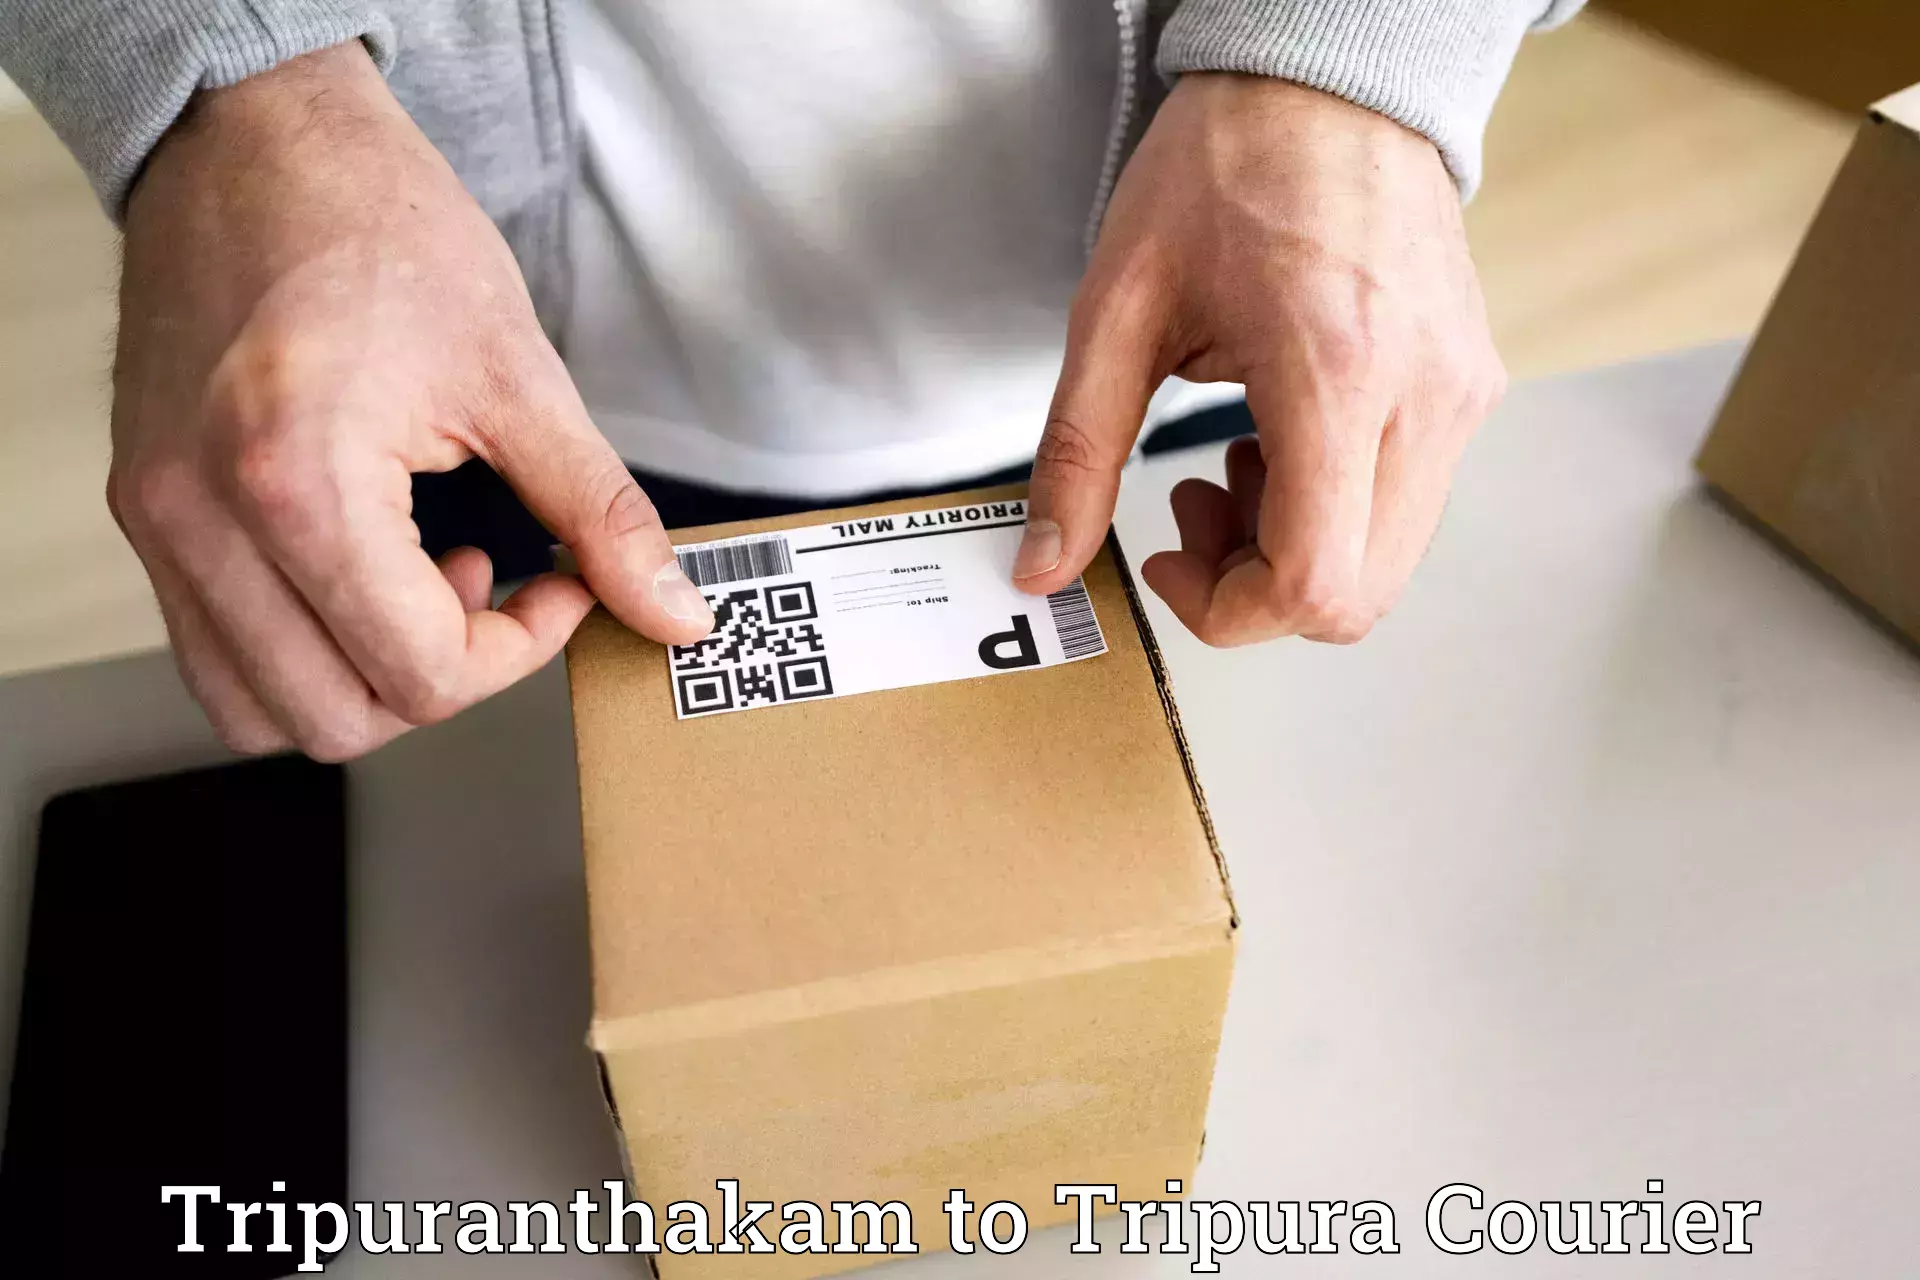 Speedy delivery service in Tripuranthakam to Udaipur Tripura